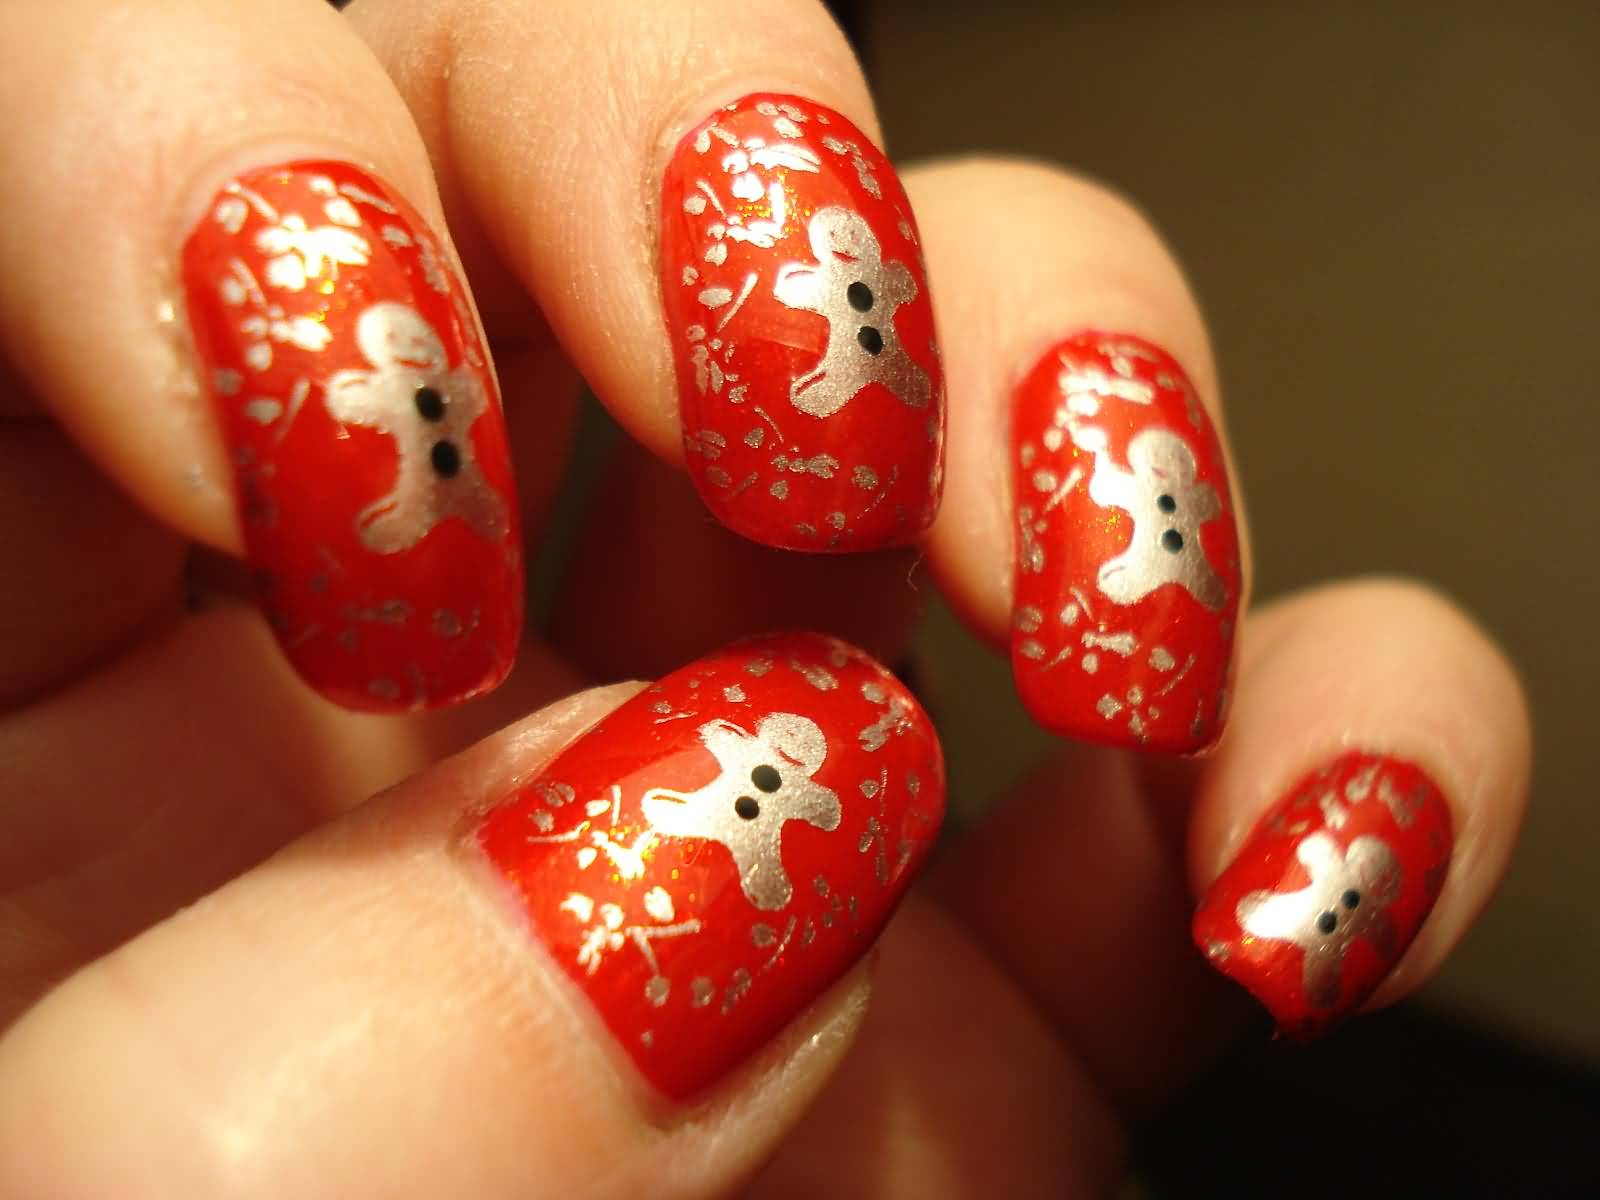 Red Base Nails With Silver Gingerbread Man Design Nail Art